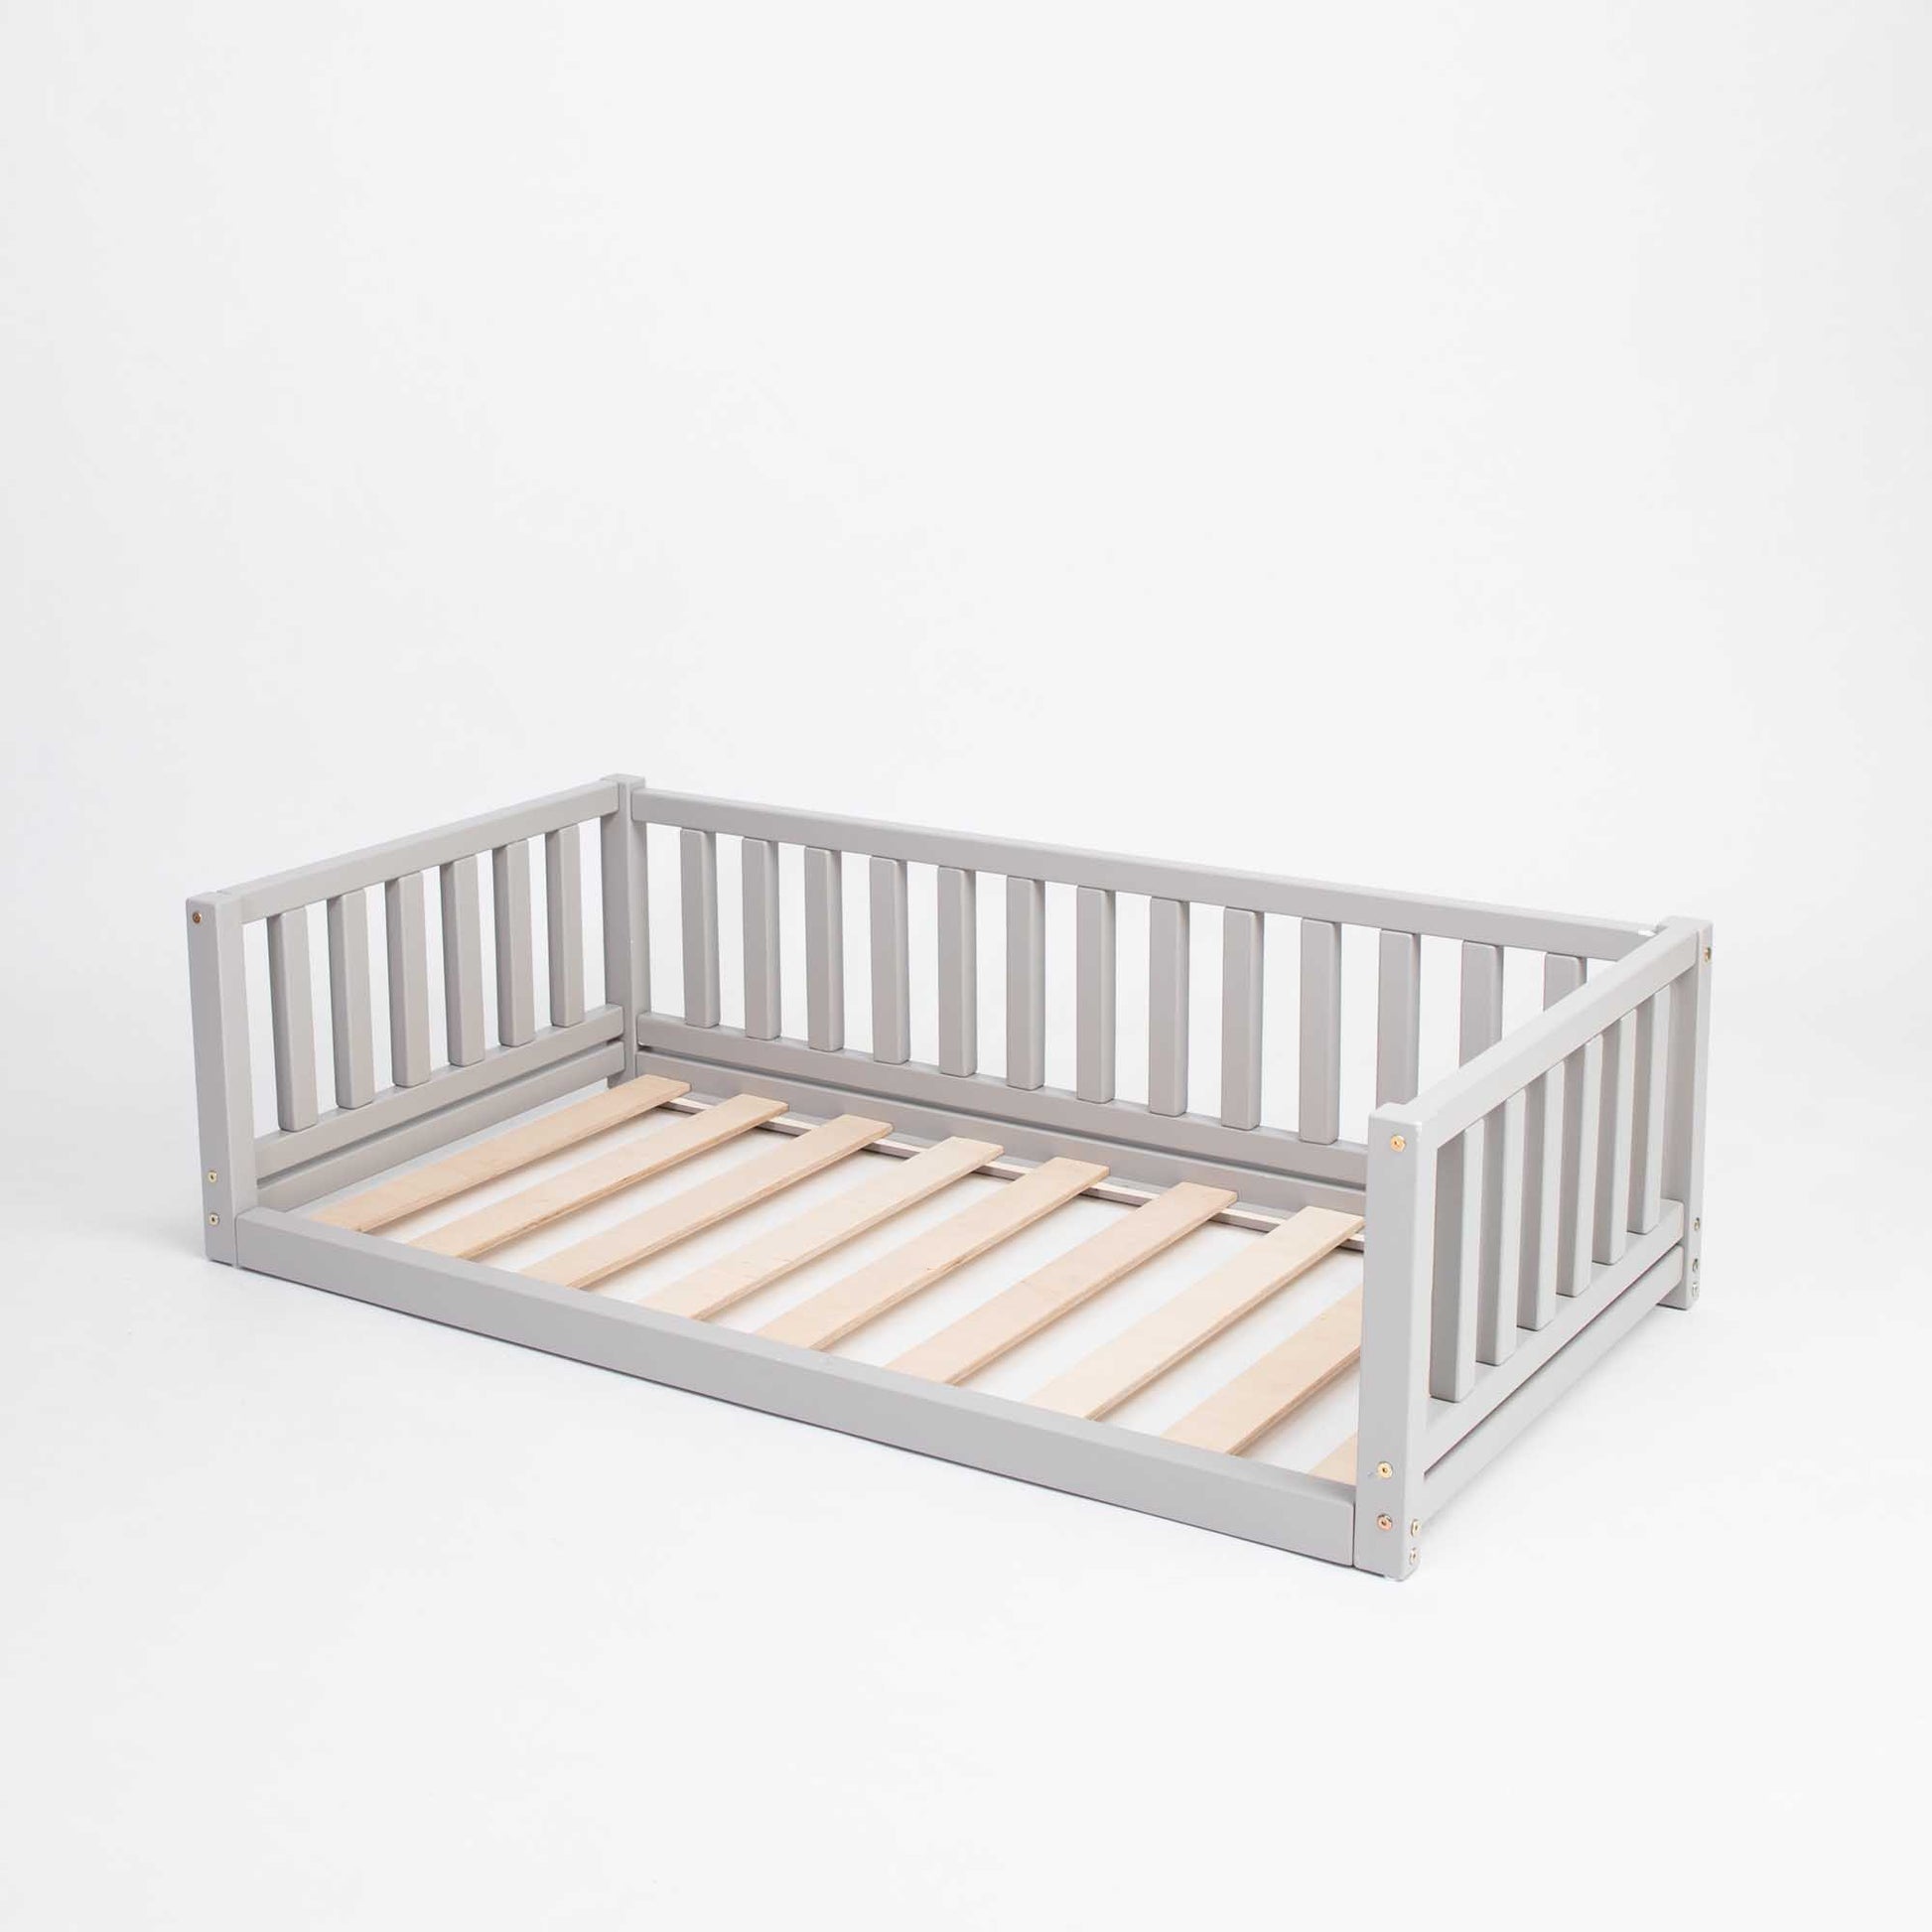 A Montessori bed with 3-sided rails, suitable for boys and girls from Sweet Home From Wood.